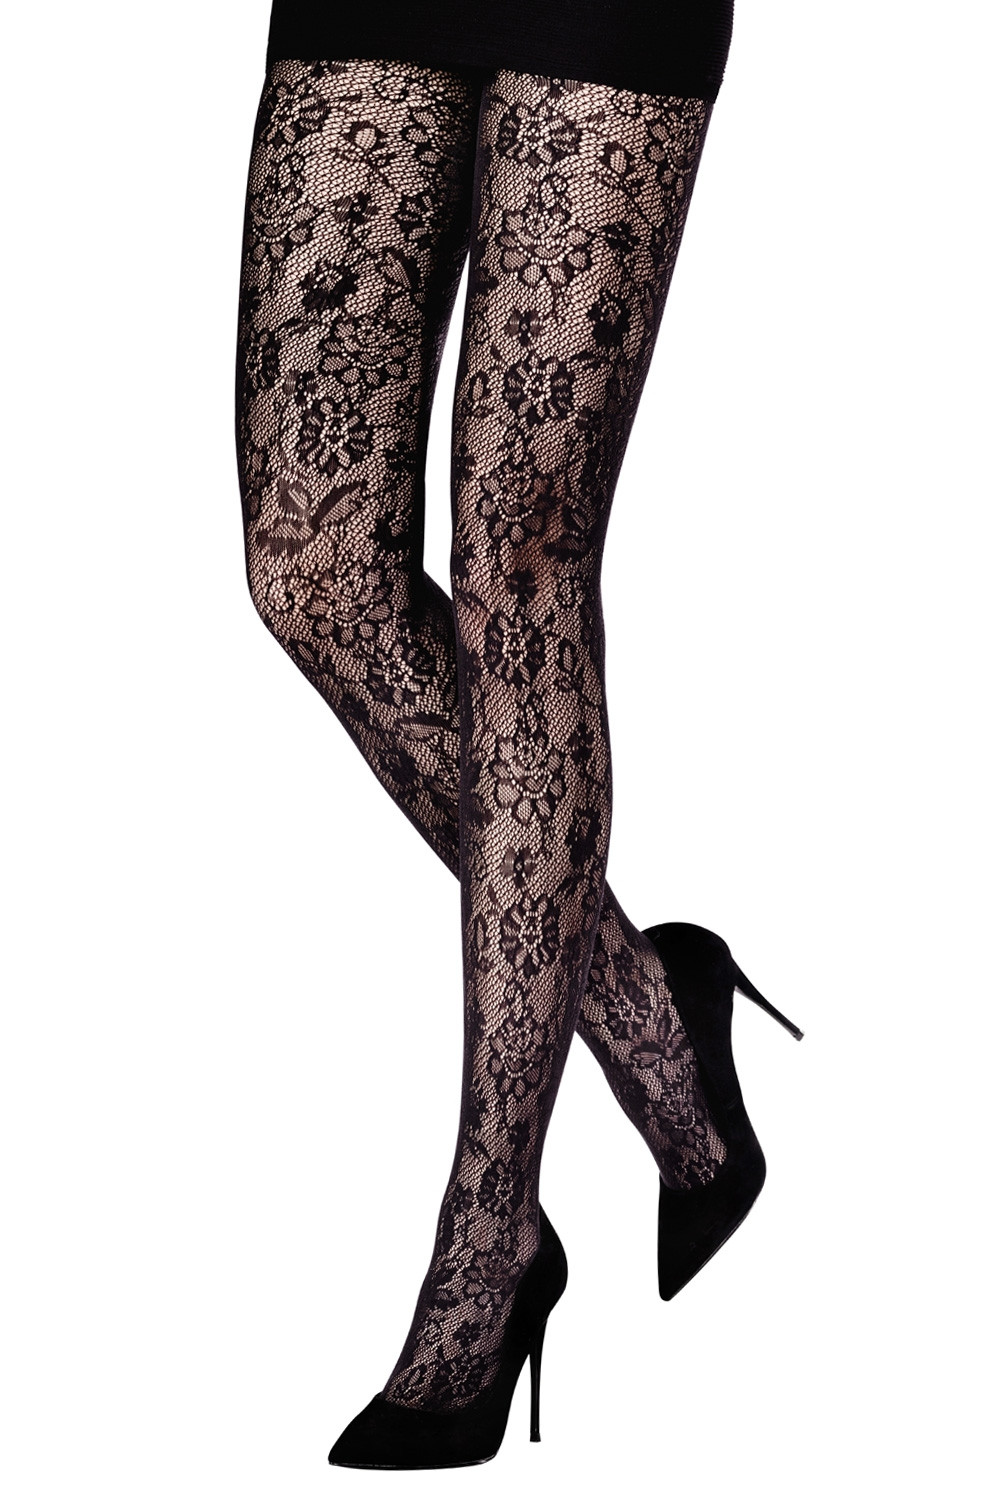 Patterned Tights, Best Pattern Tights, Tights For Women